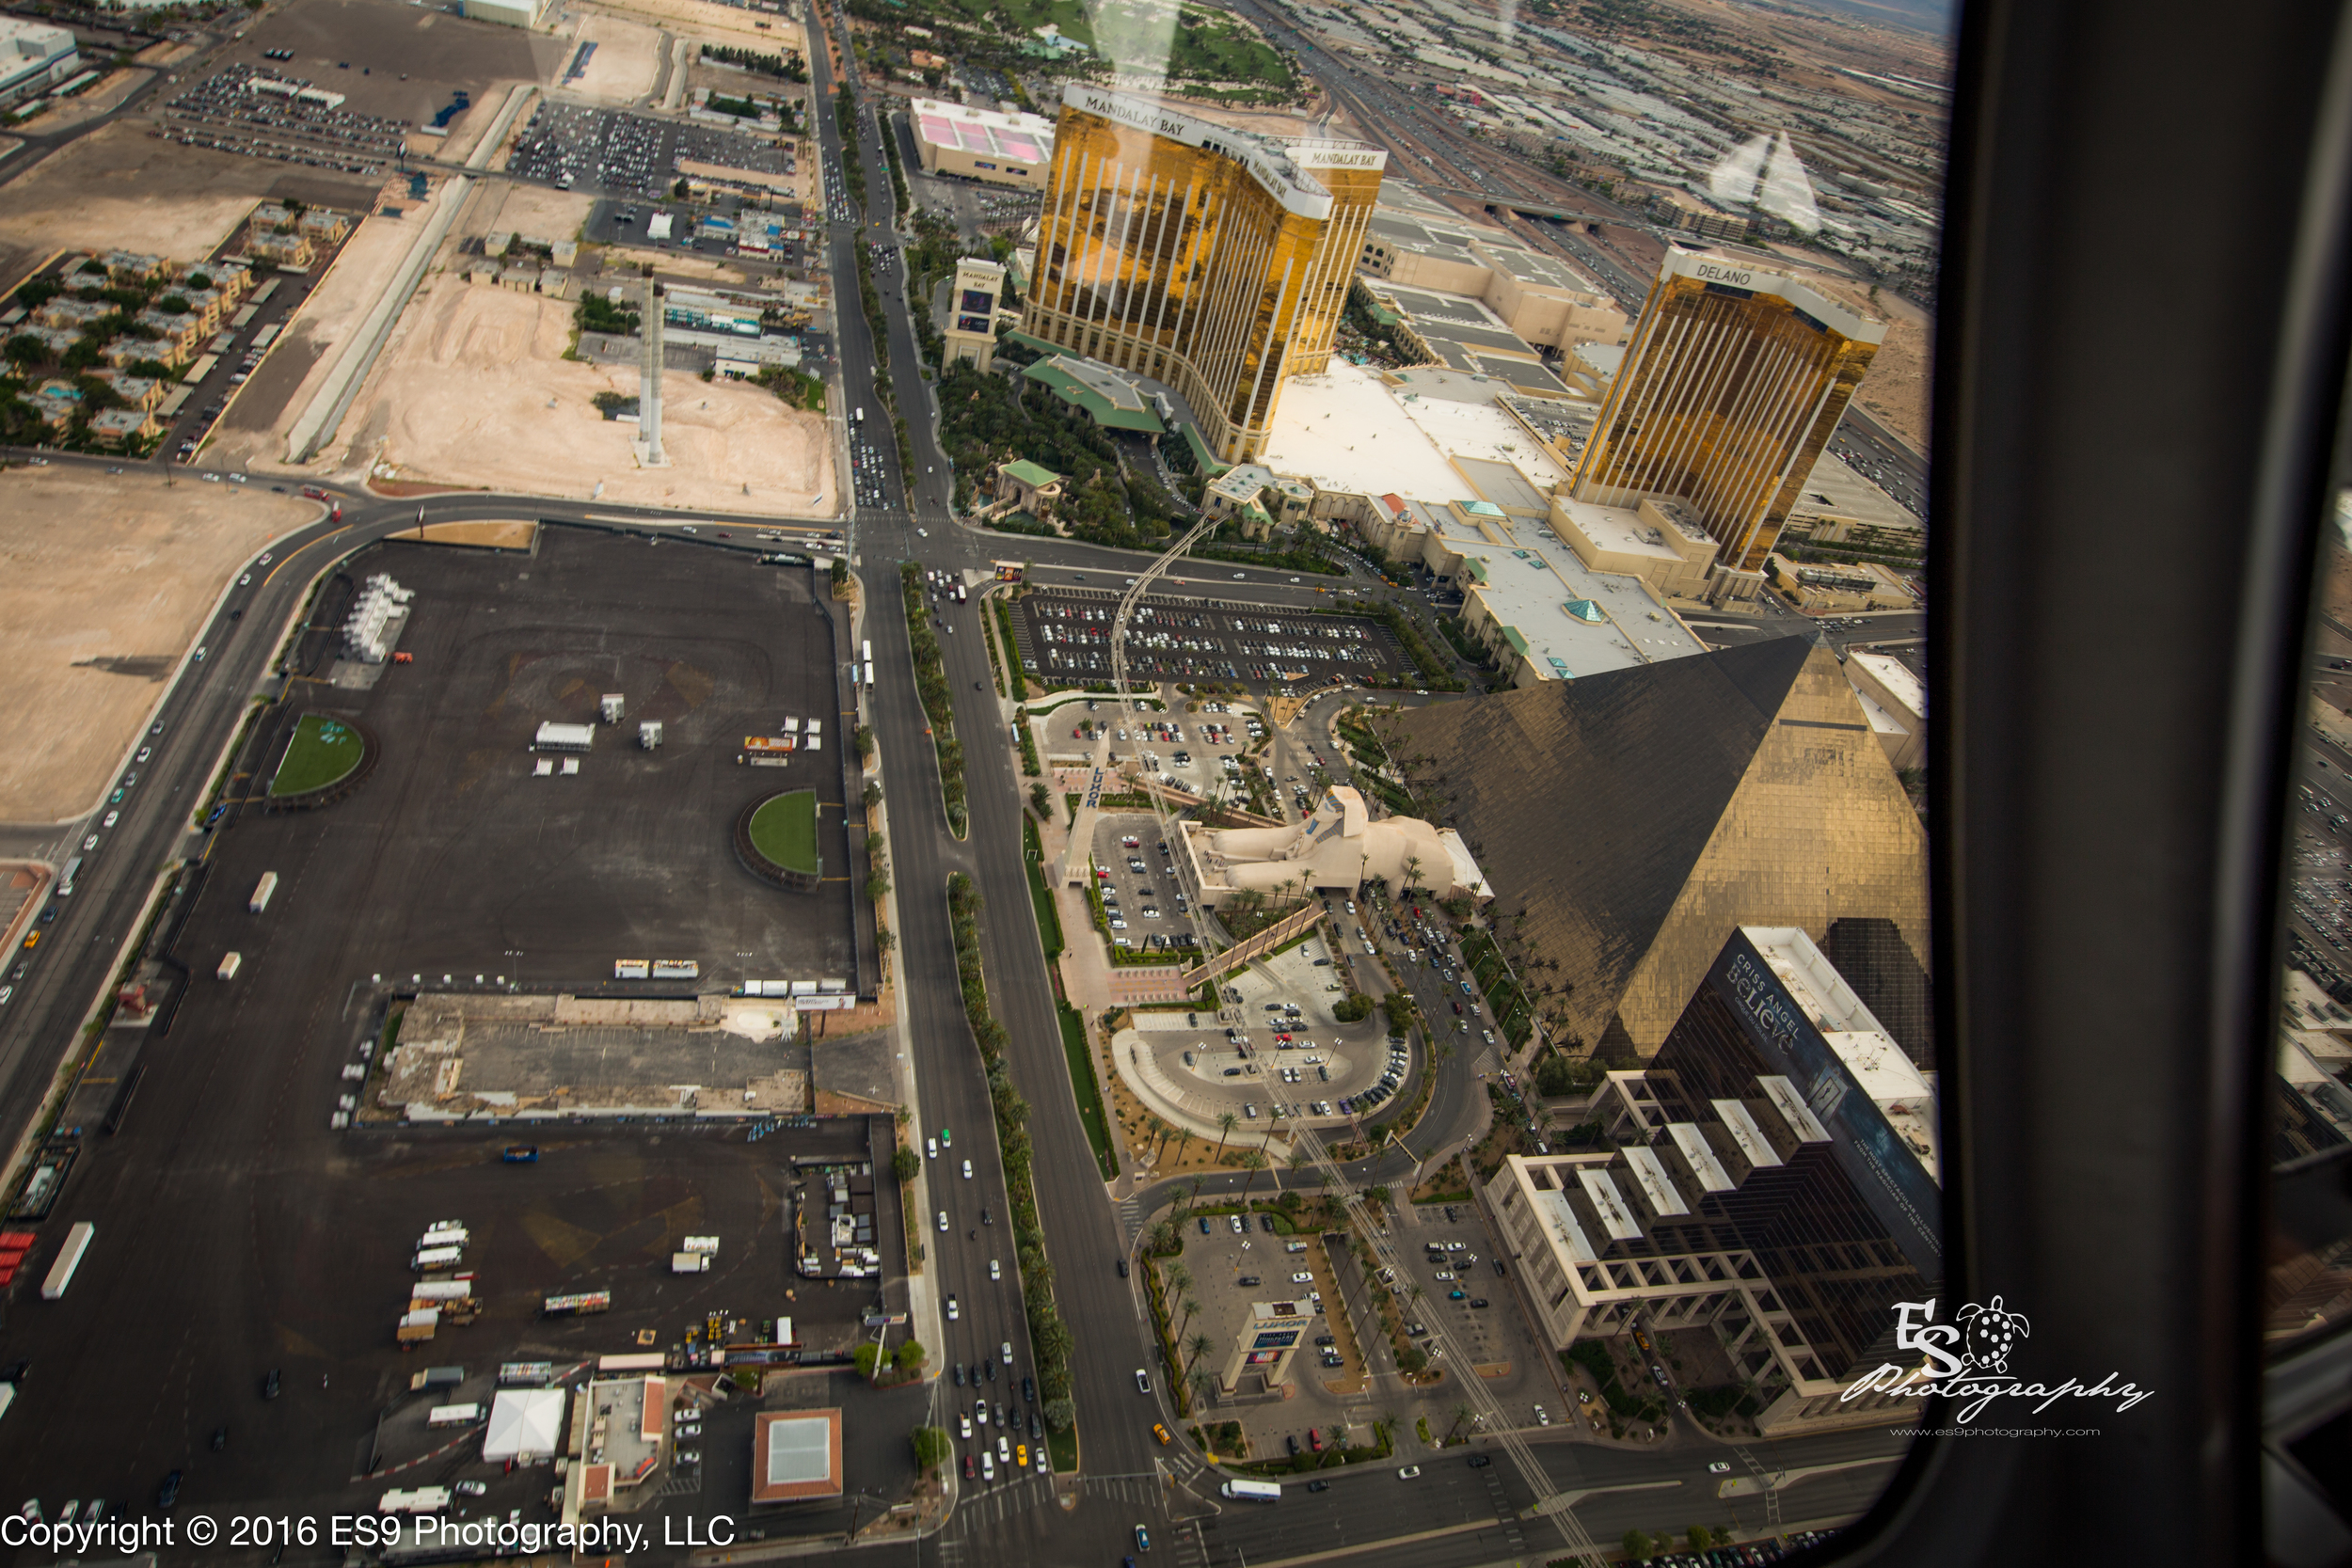 Las Vegas Strip from our AIRBUS EC-130 Sundance Helicopter Tour Grand Canyon West @ ES9 Photography 2016.jpg